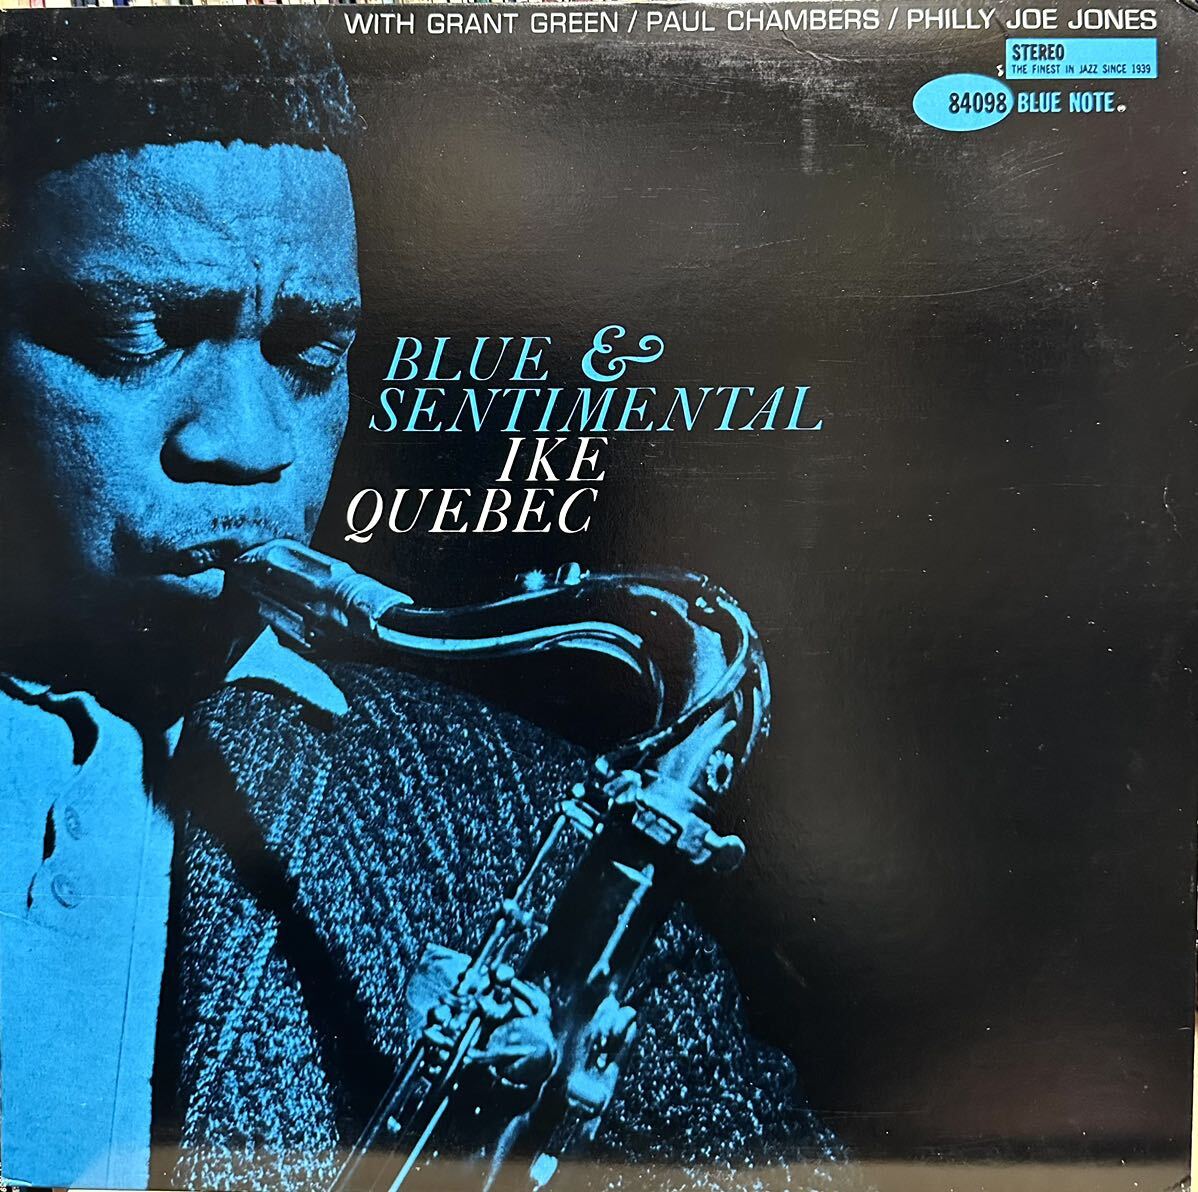 LP 輸入盤　IKE QUEBEC／BLUE AND SENTIMENTAL (’61年録音 '86年発売品) BLUE NOTE 84098 _画像1